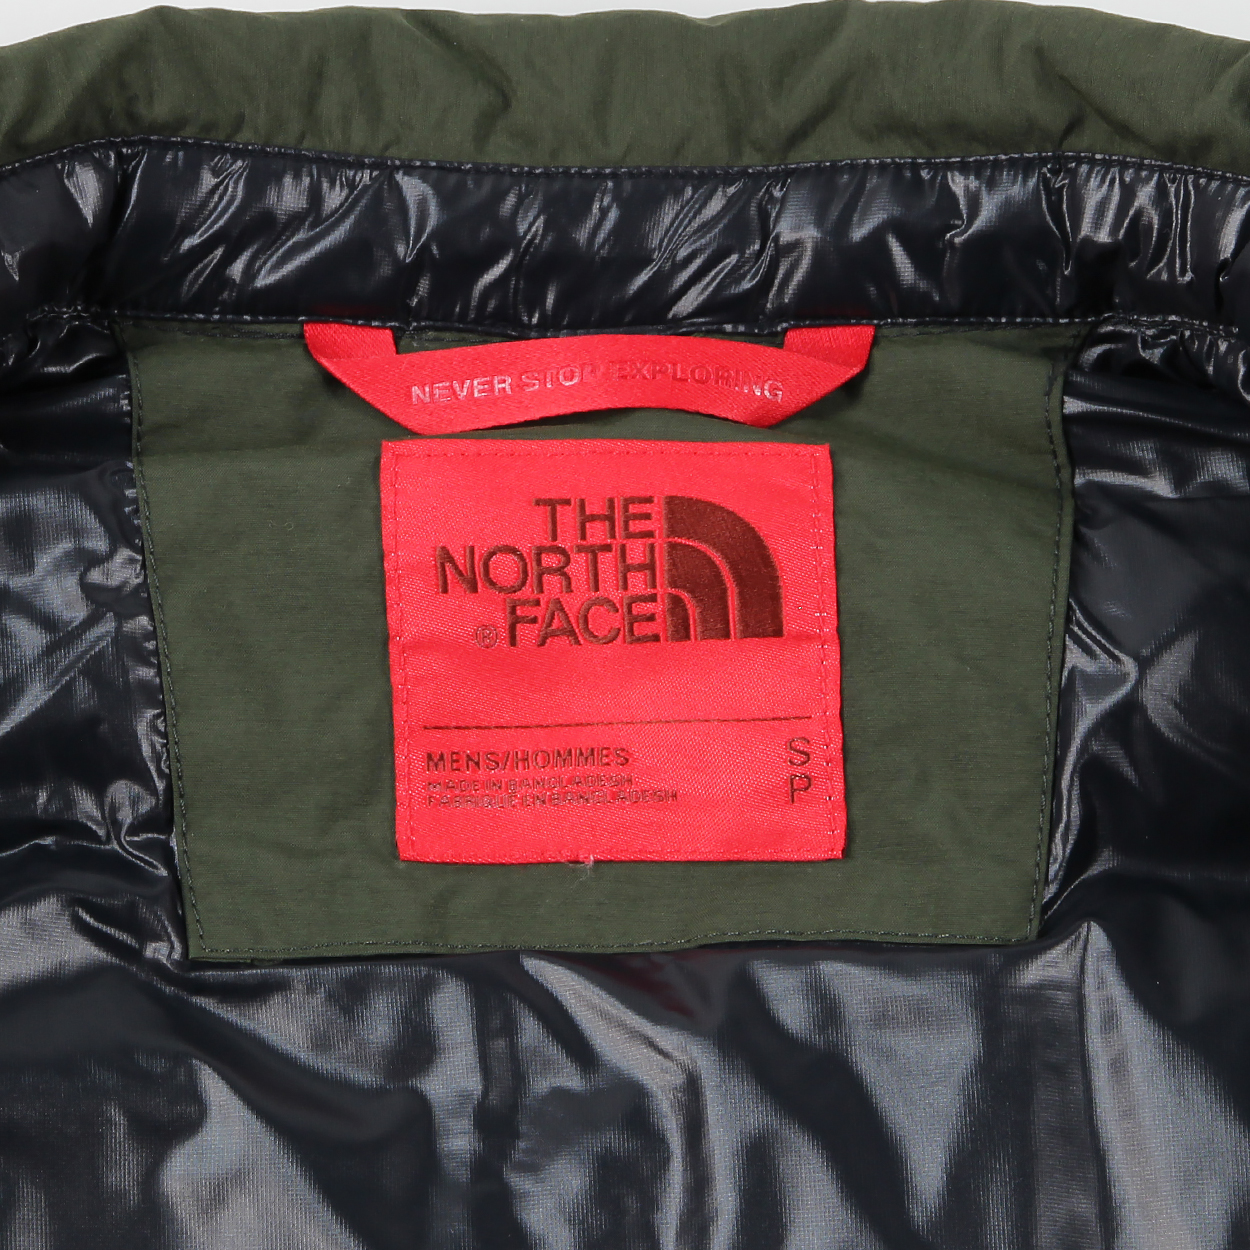 Introducing The North Face Red Label - Proper Magazine